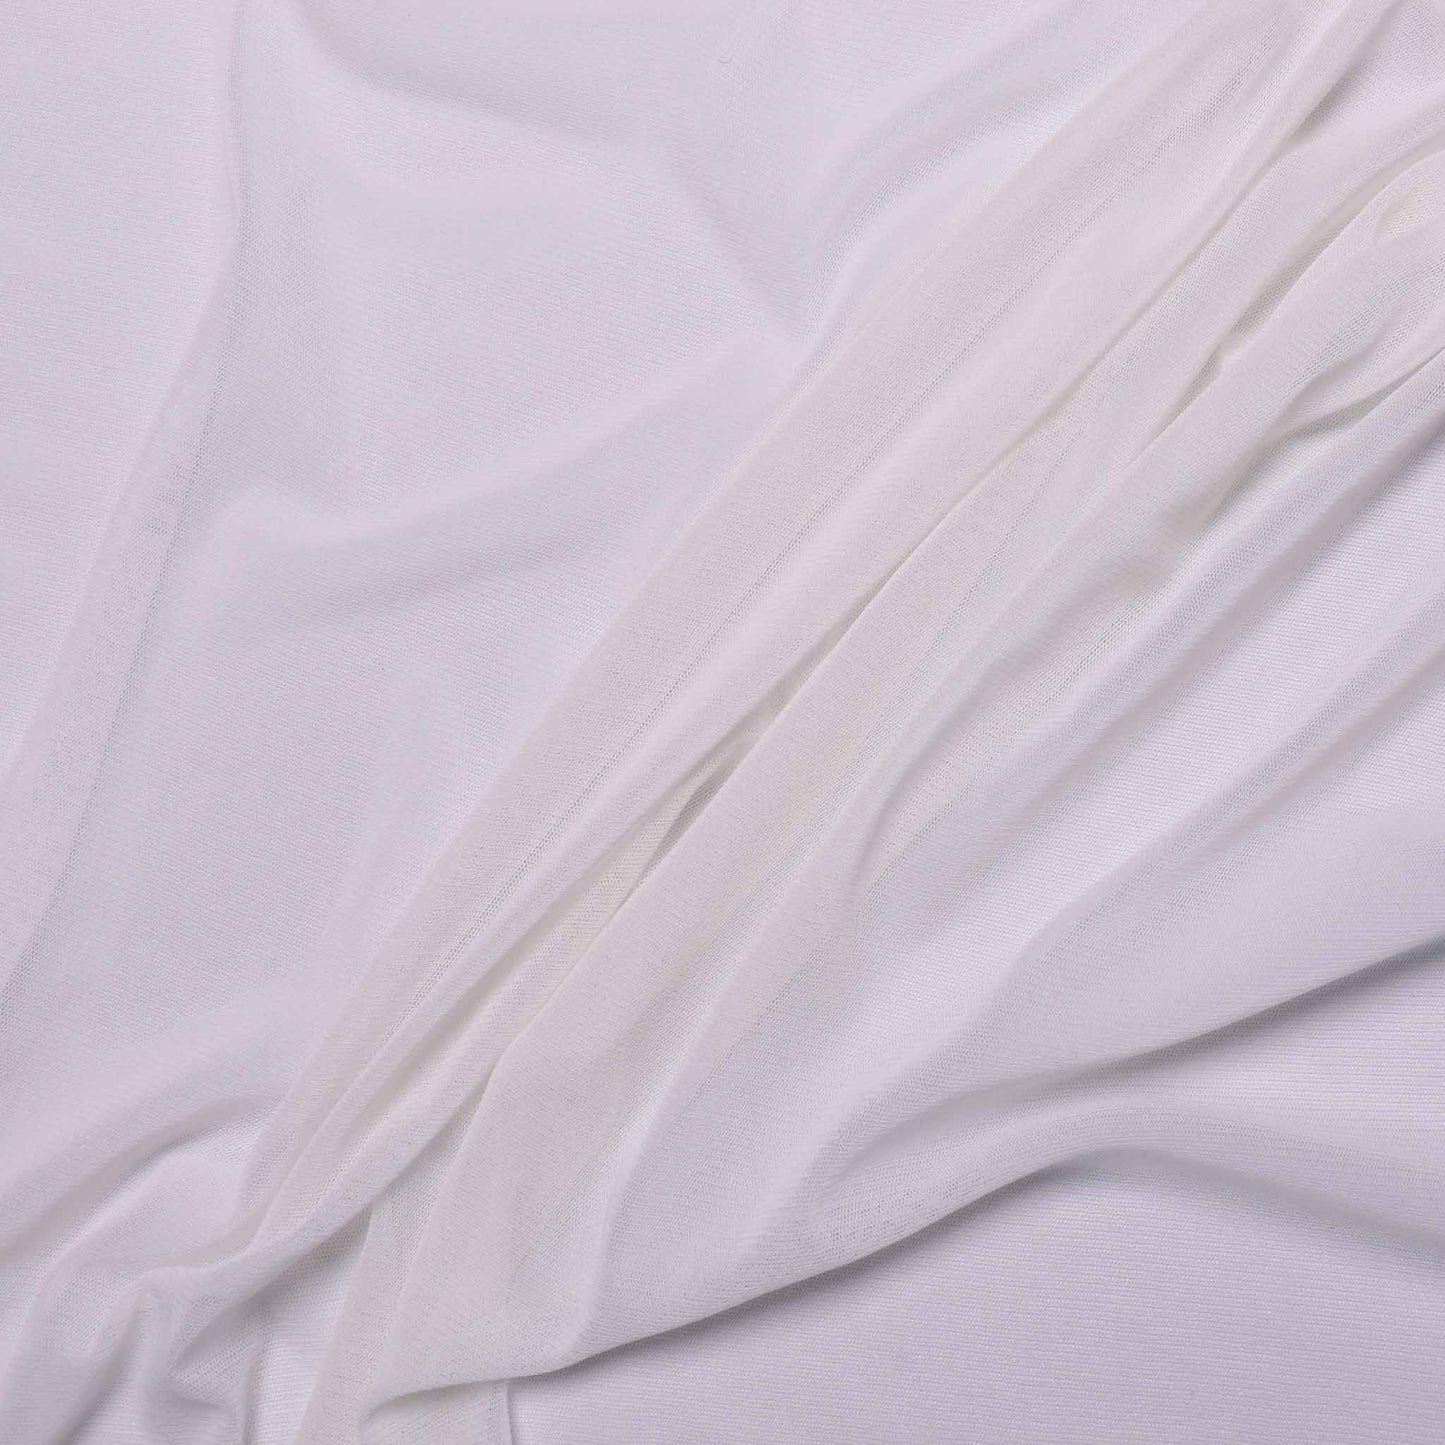 plain white netting fabric for dressmaking with stretch